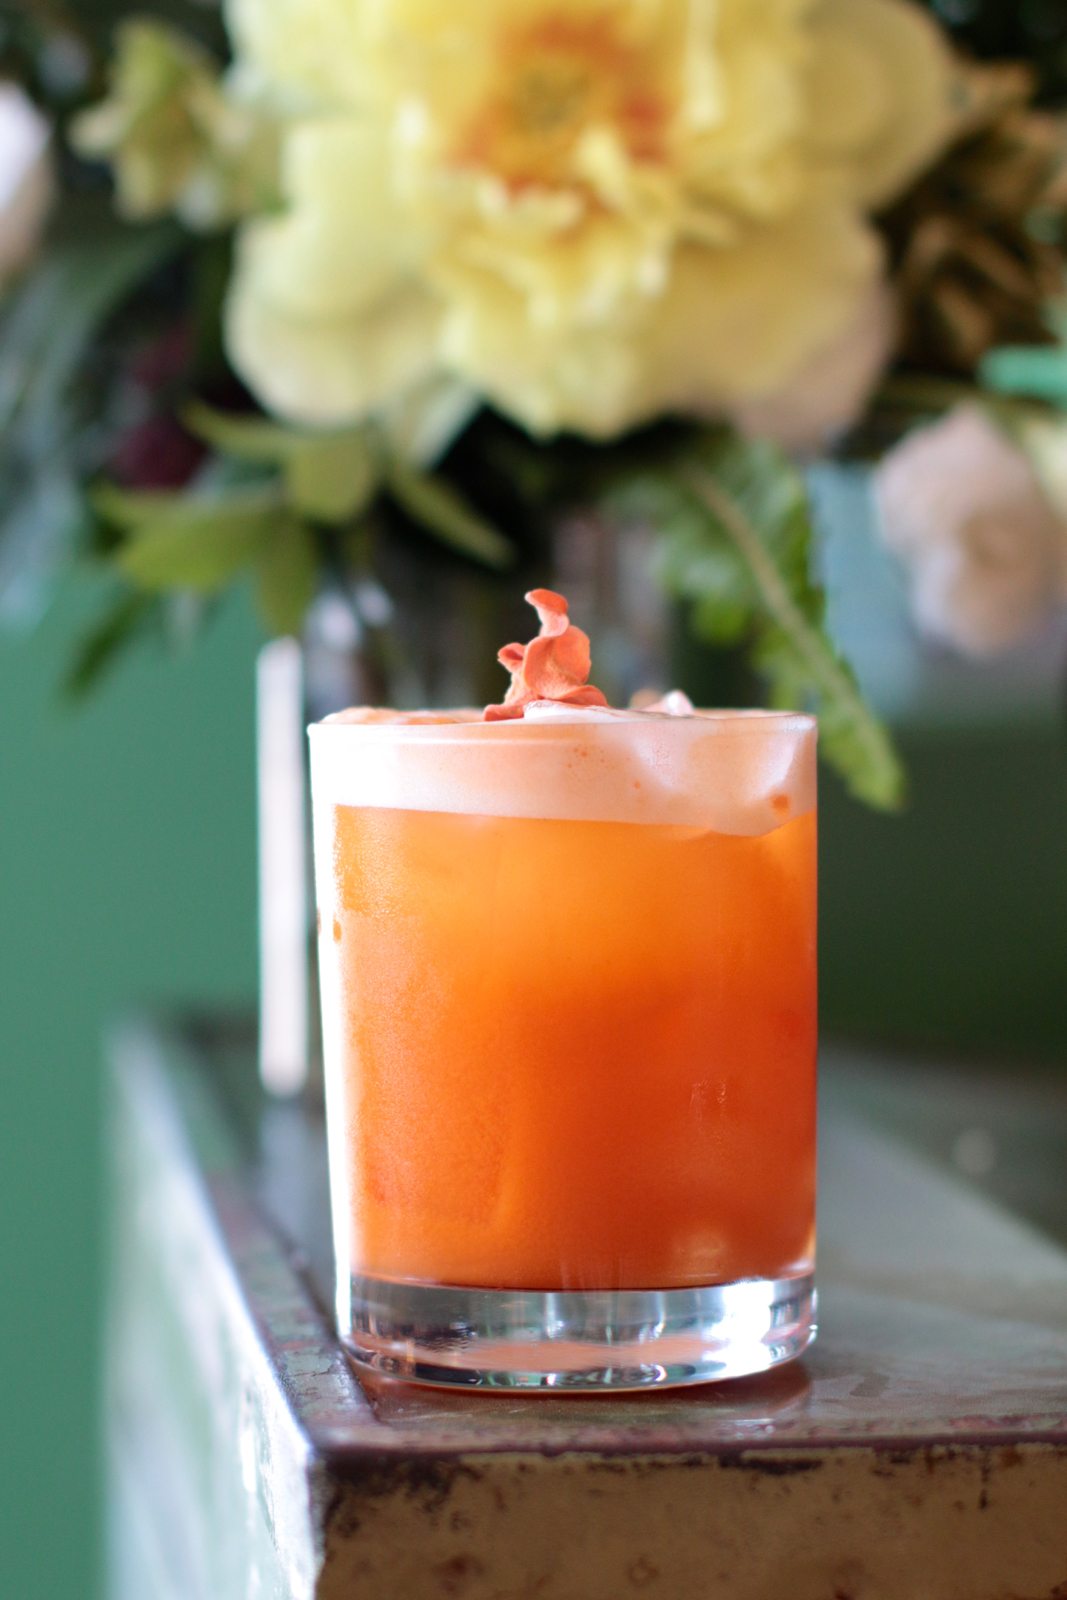 The Queen Street Sour is a mix of Gooderham & Worts Whisky and carrot-apple-tumeric-lemon juice, topped with a chickpea-derived vegan foam. $15.